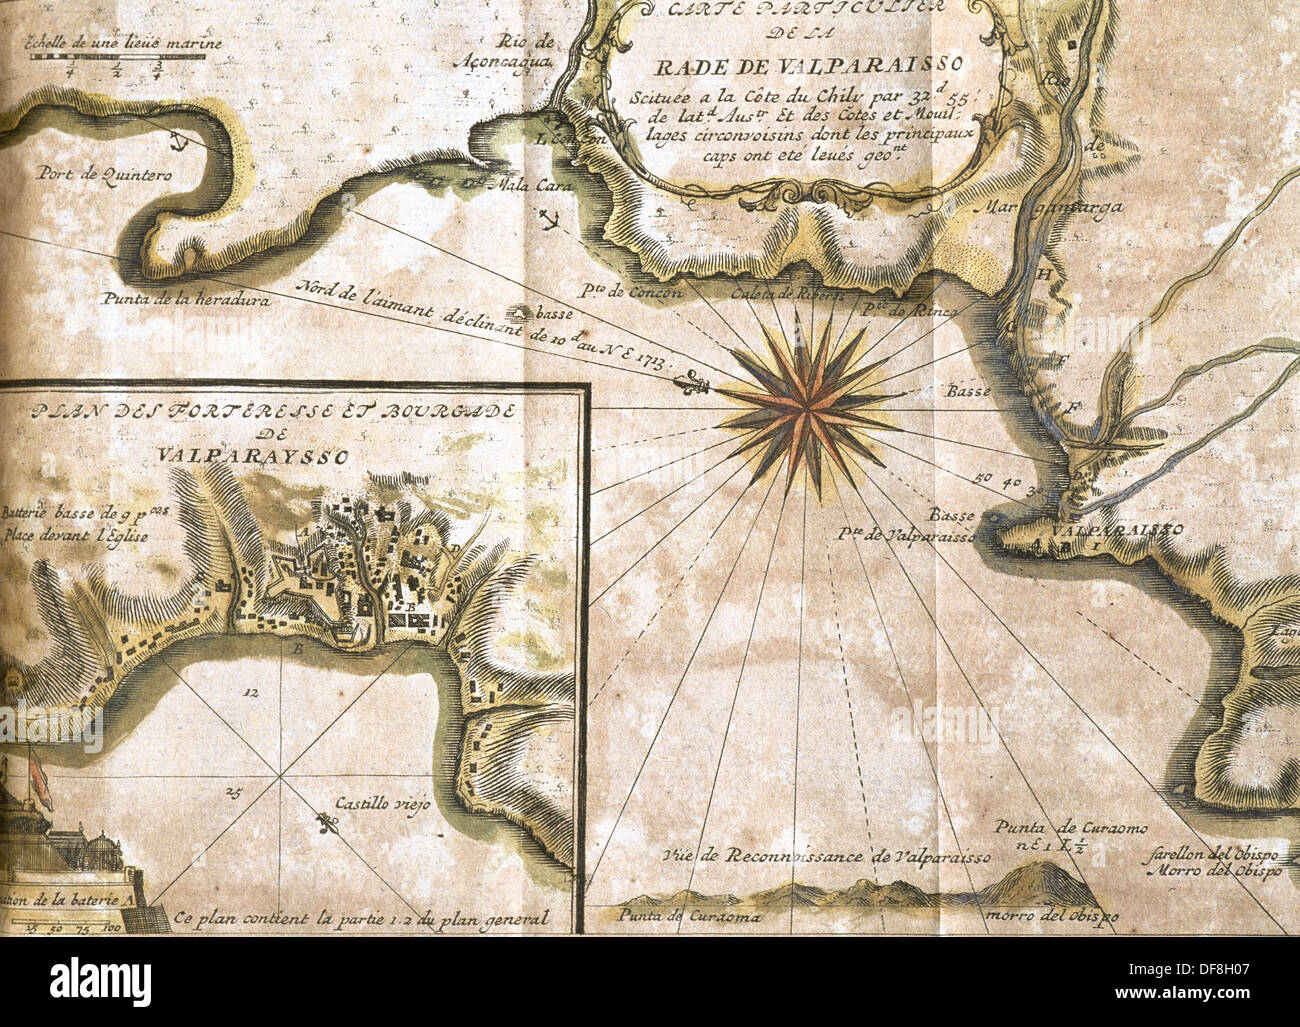 Chile. Valparaiso. Map in 1713 after an engraving of 1717. Stock Photo